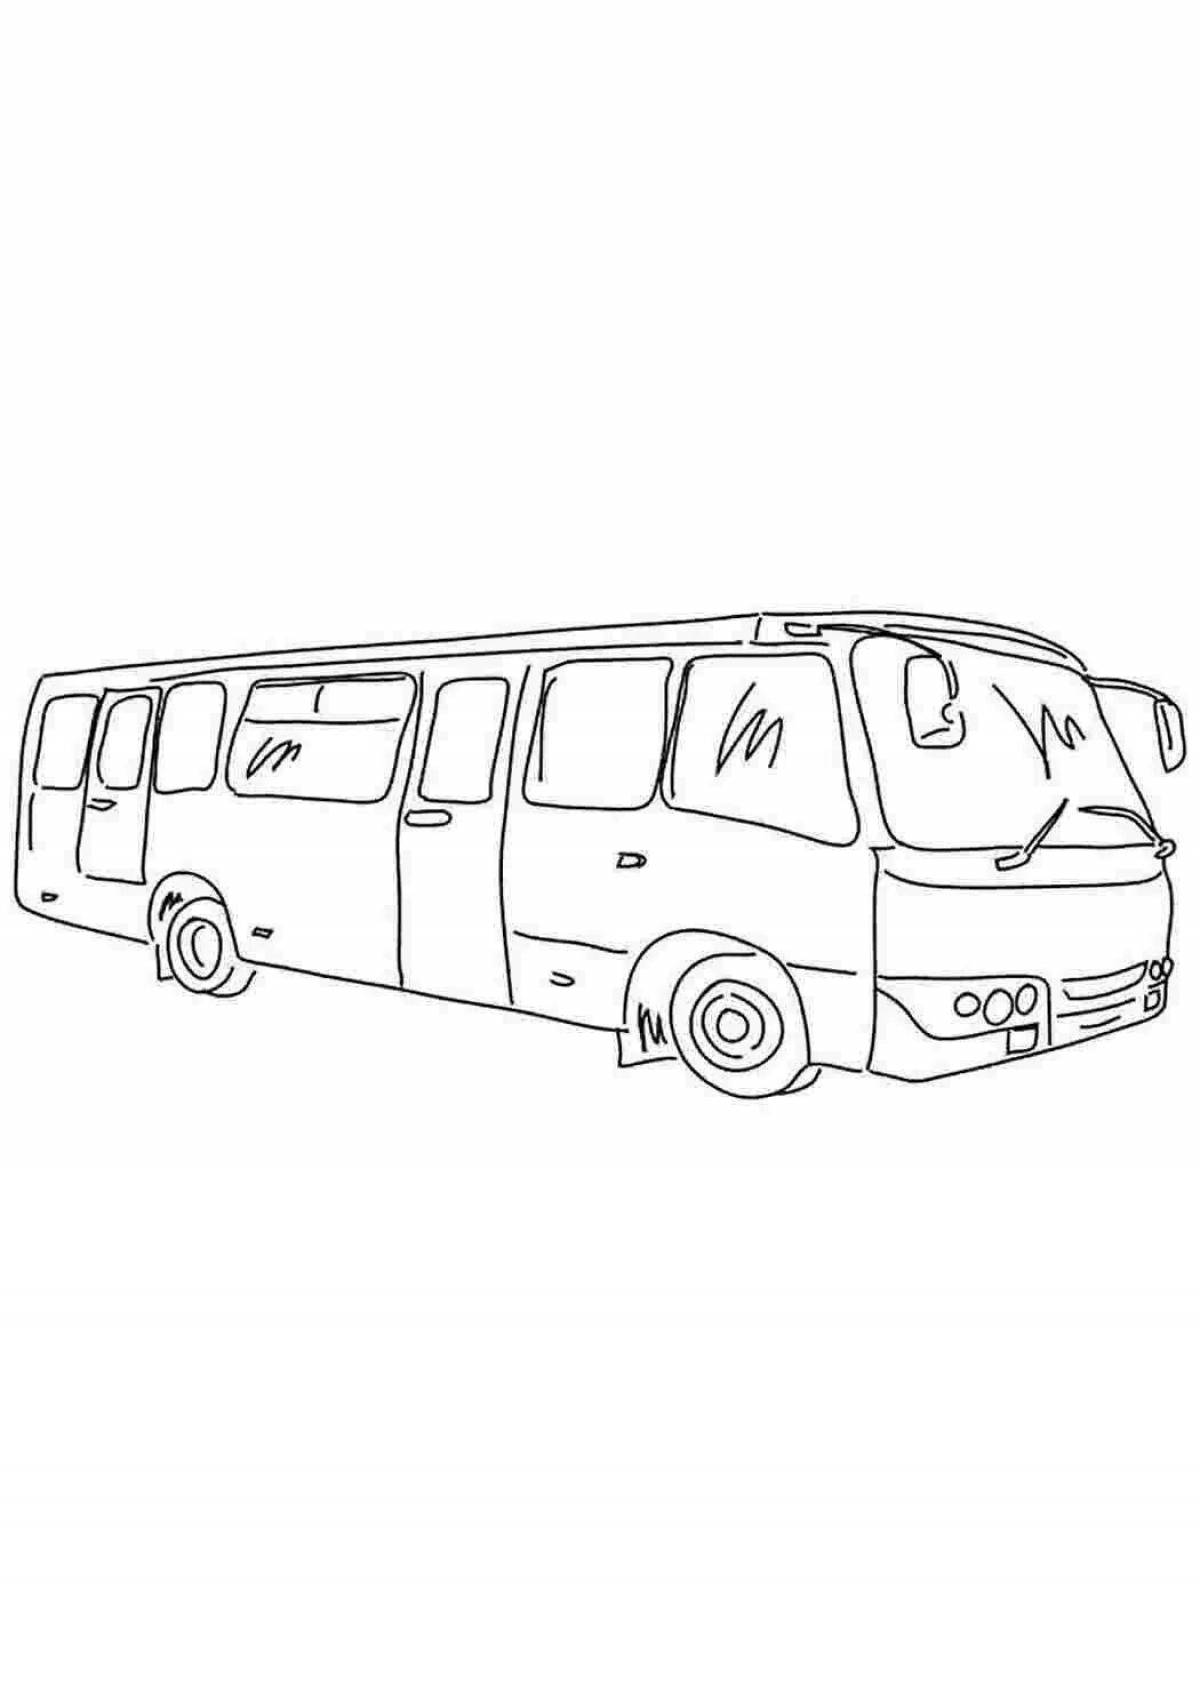 Coloring page delightful pazik bus